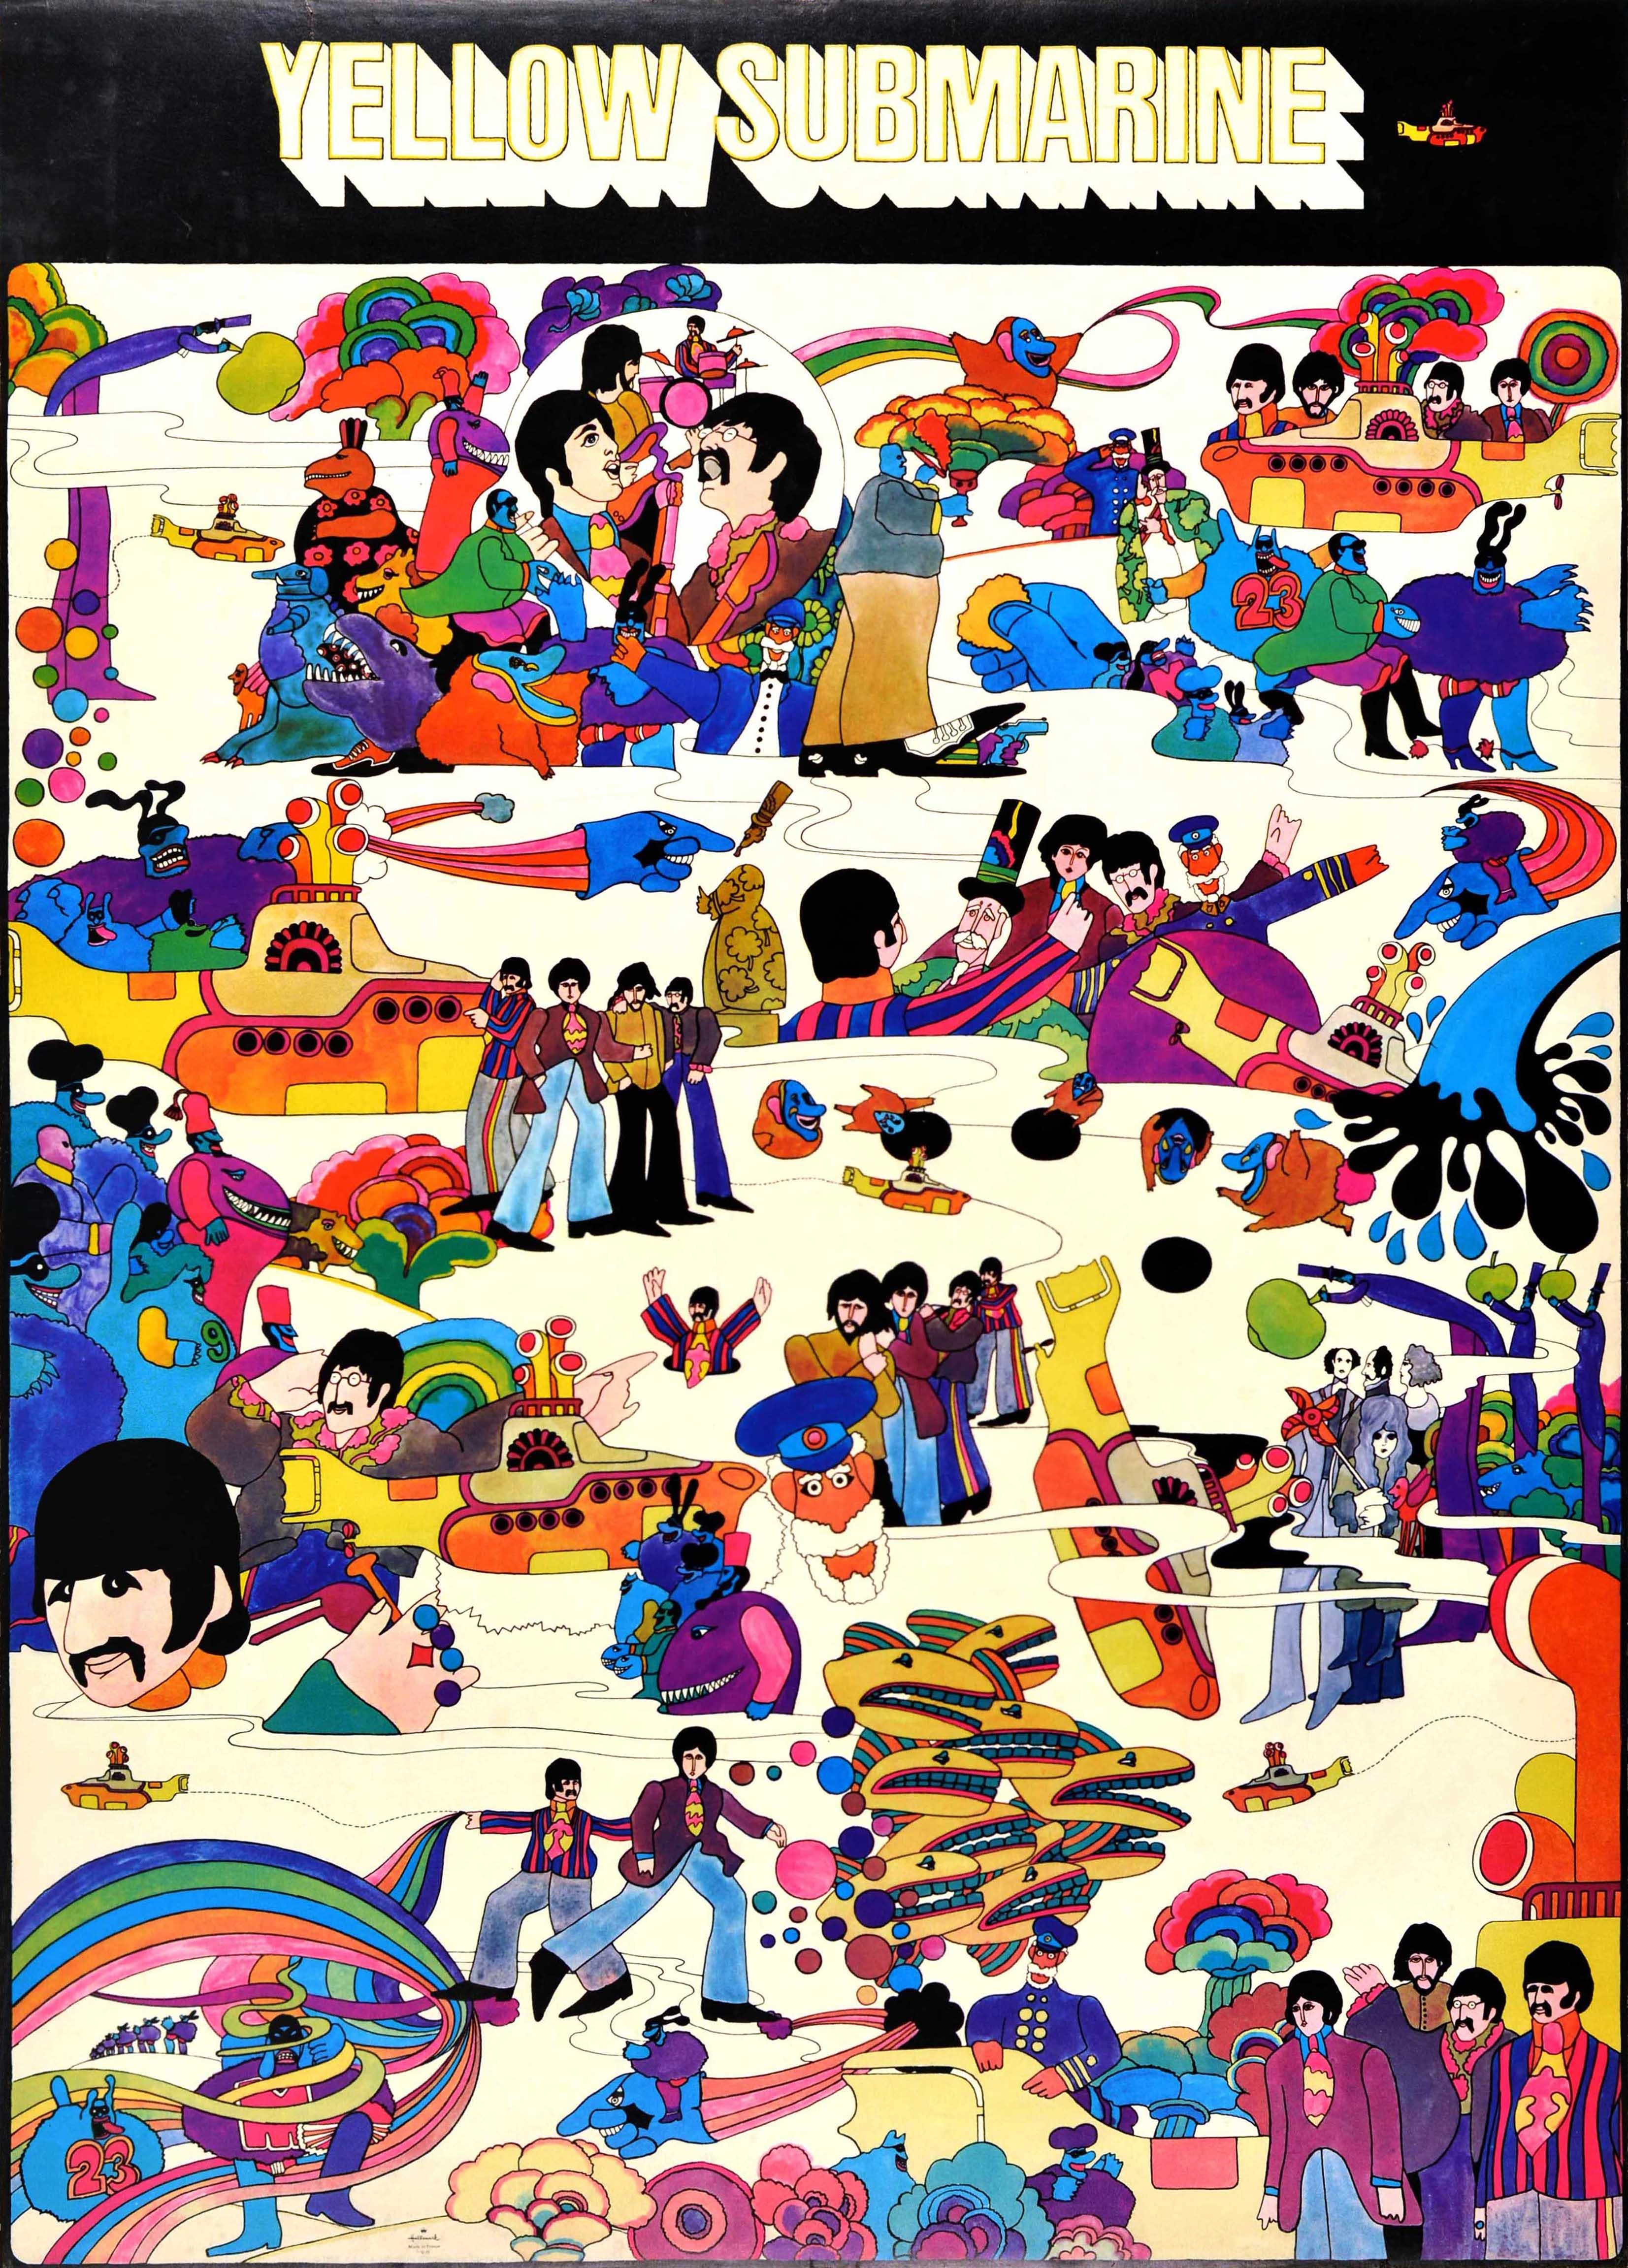 Unknown Print - Original Vintage Poster Yellow Submarine The Beatles Sgt. Pepper Music Movie Art